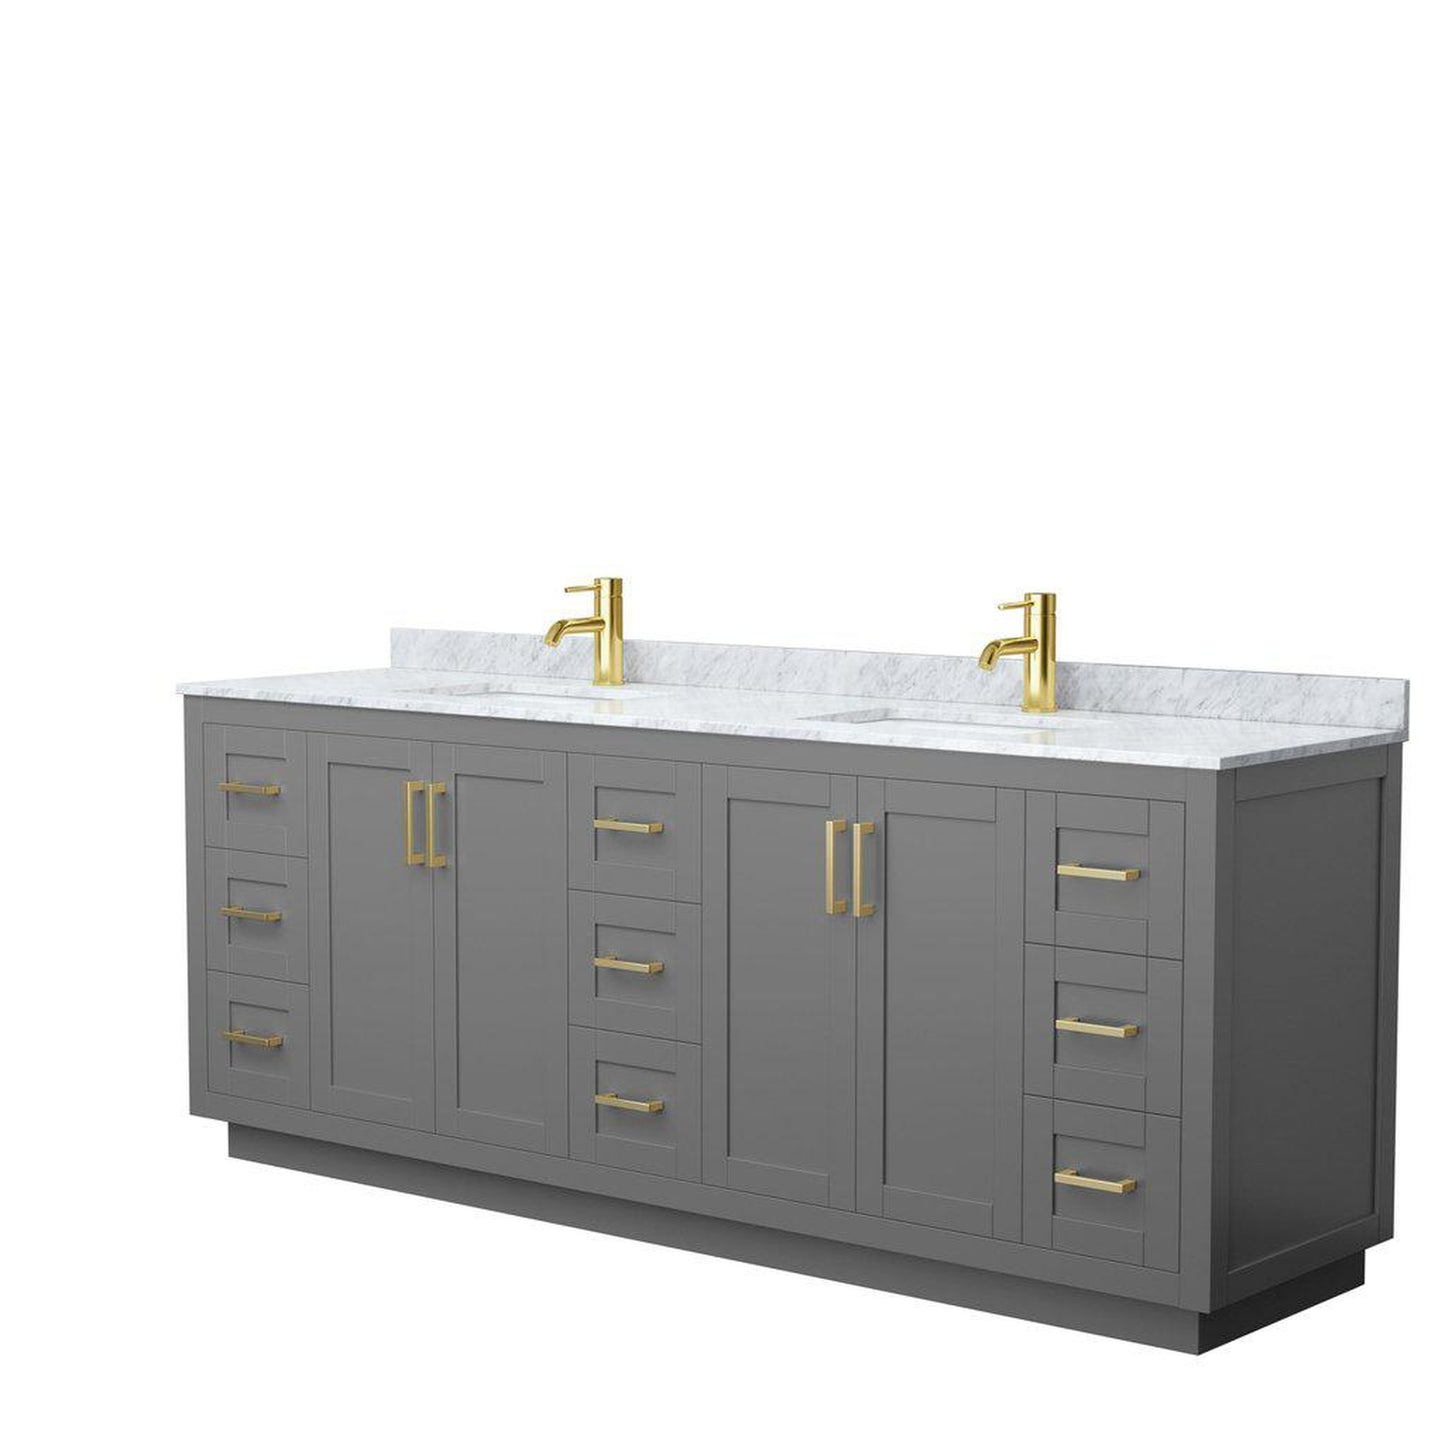 Wyndham Collection Miranda 84" Double Bathroom Dark Gray Vanity Set With White Carrara Marble Countertop, Undermount Square Sink, And Brushed Gold Trim